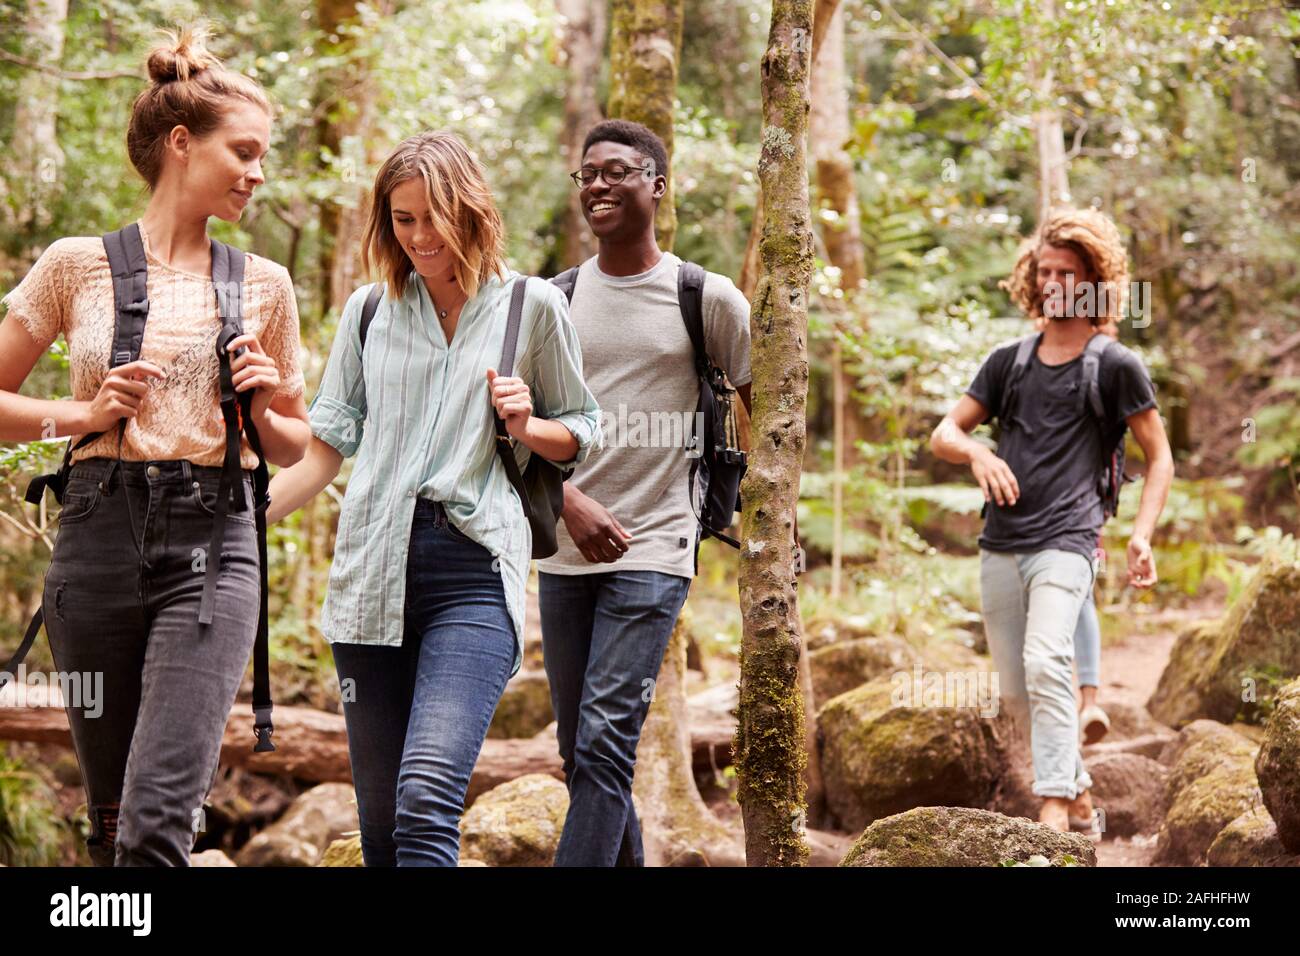 Four millennial friends hiking together in a forest, three quarter length Stock Photo